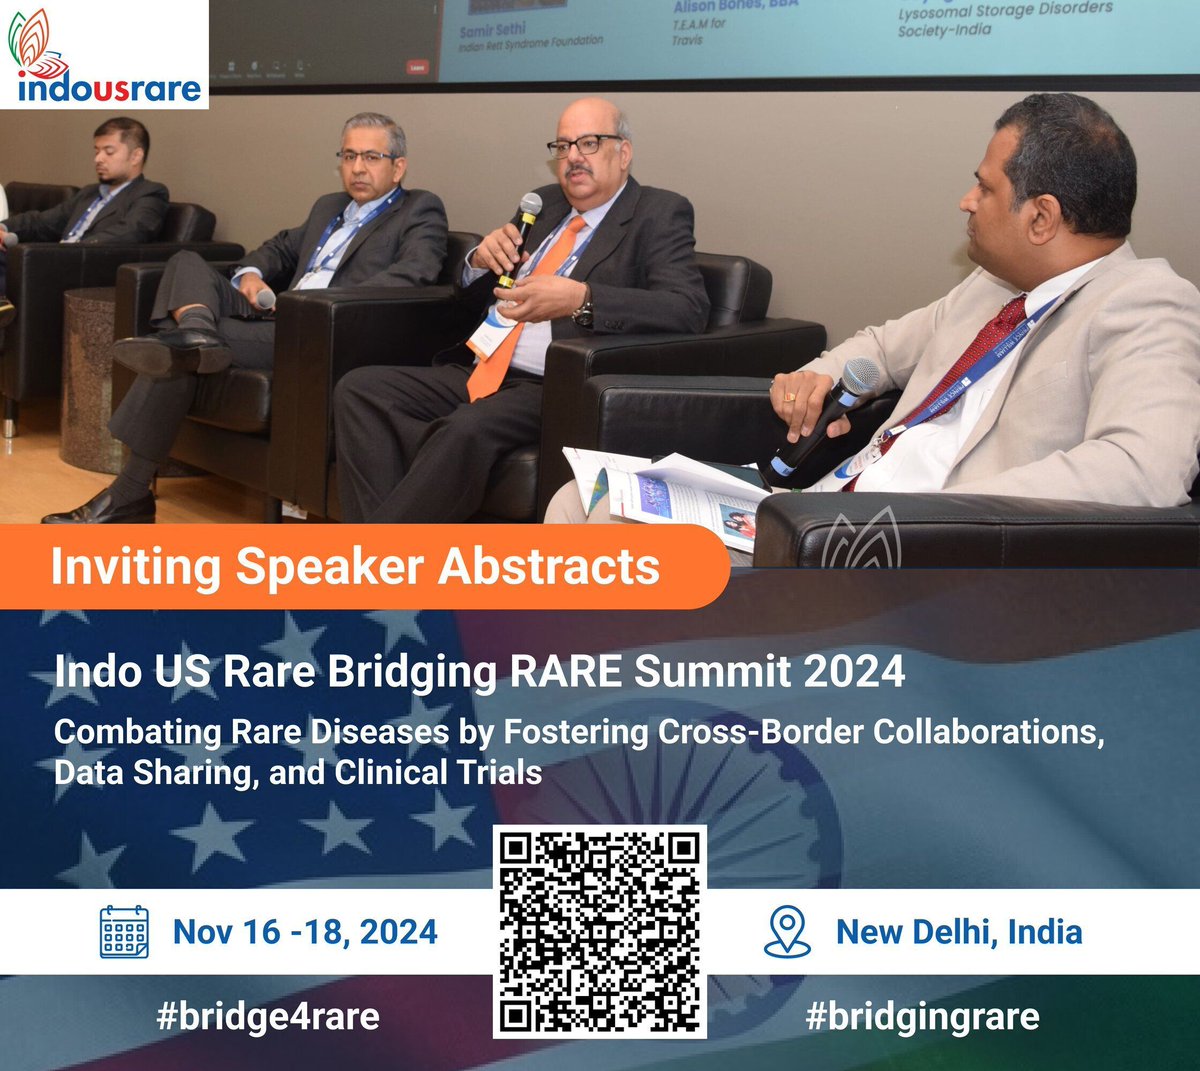 Attention #RareDisease experts! Share your ground-breaking work at the #BridgingRareSummit 2024. Don't miss this chance to connect with patients, caregivers, advocates, & industry leaders. Submit your abstract now: bit.ly/bridge4rarespe… #bridge4rare #bridgingrare #IndoUSrare